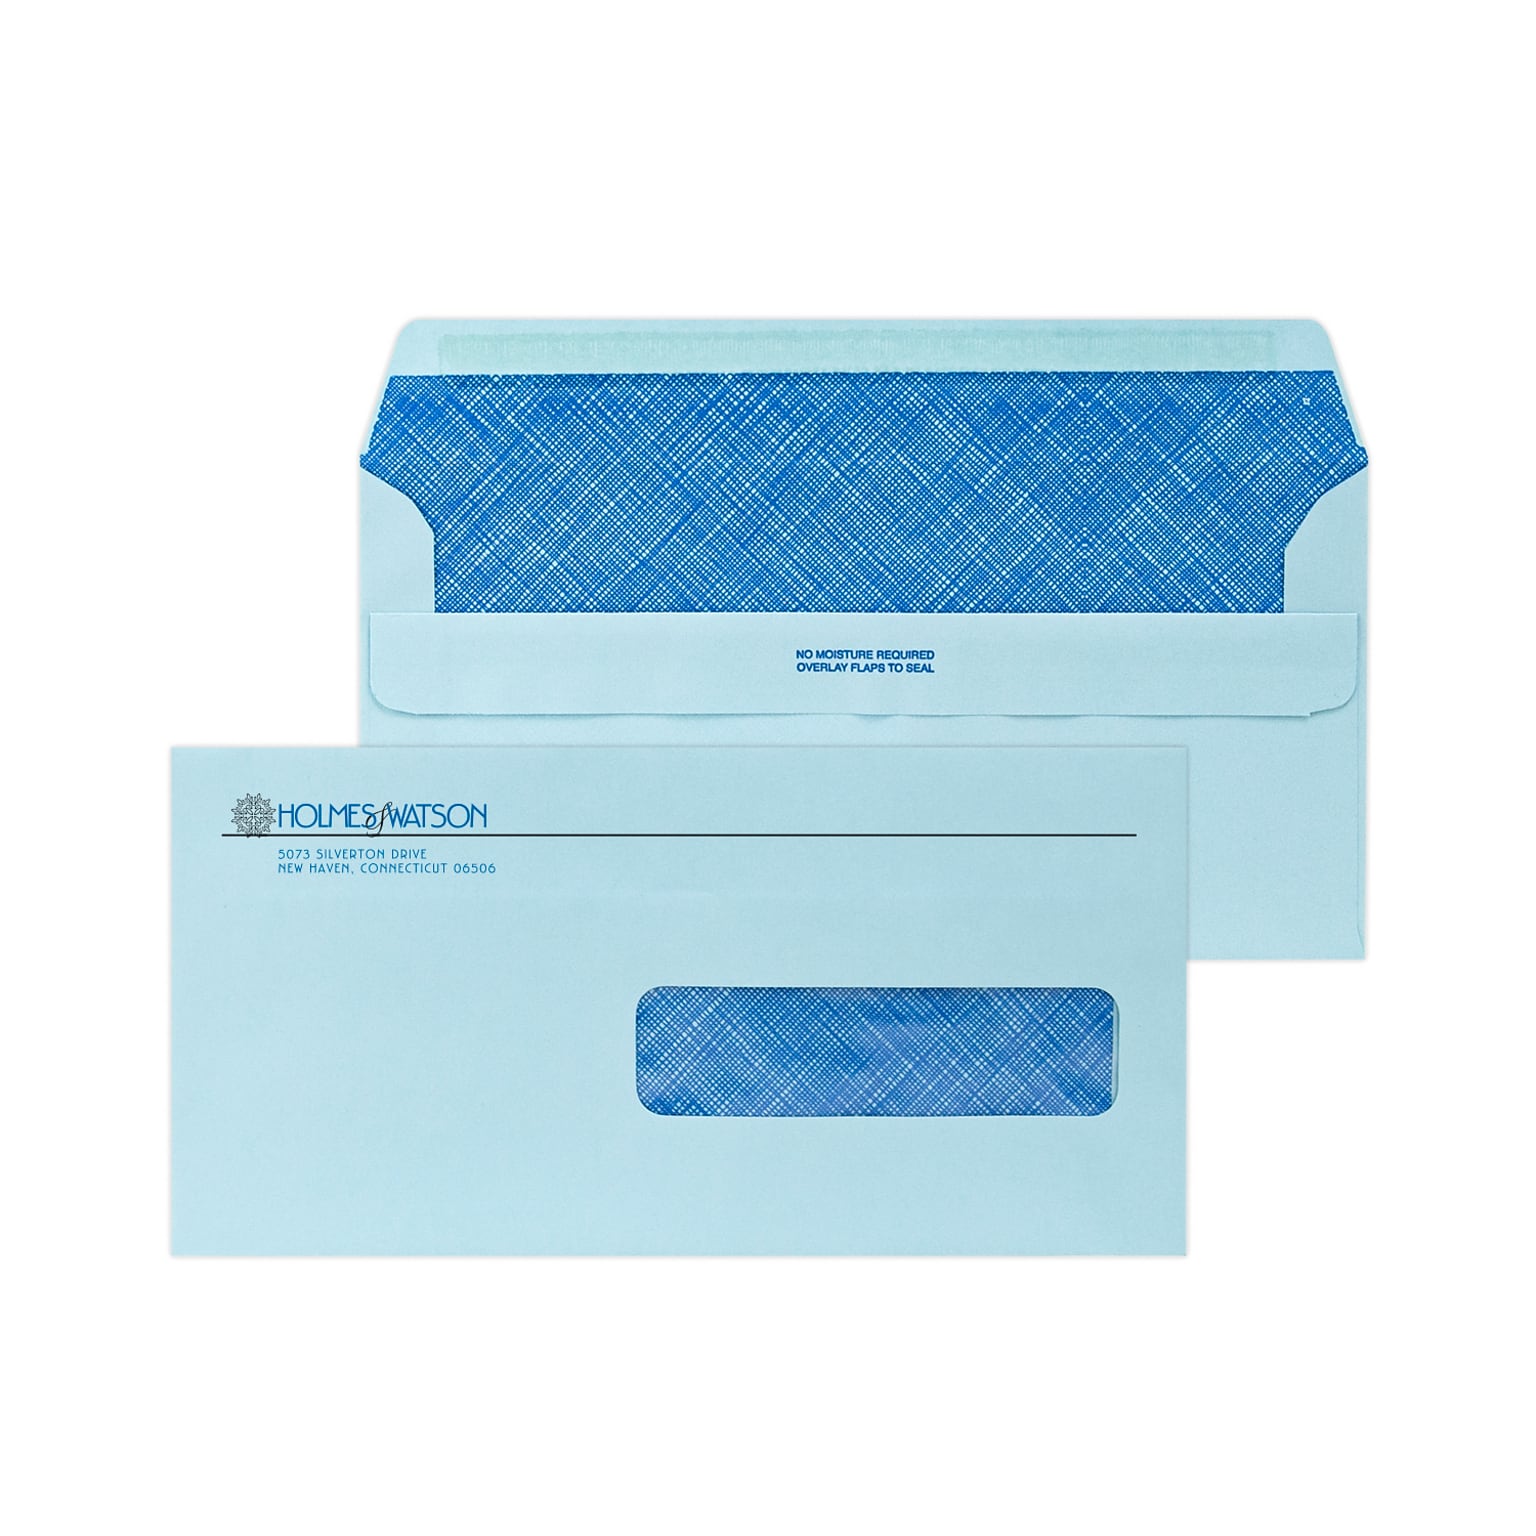 Custom 4-1/2 x 9 Insurance Claim Self Seal Right Window Envelopes with Security Tint, 24# Blue Wove, 2 Standard Inks, 250/Pack